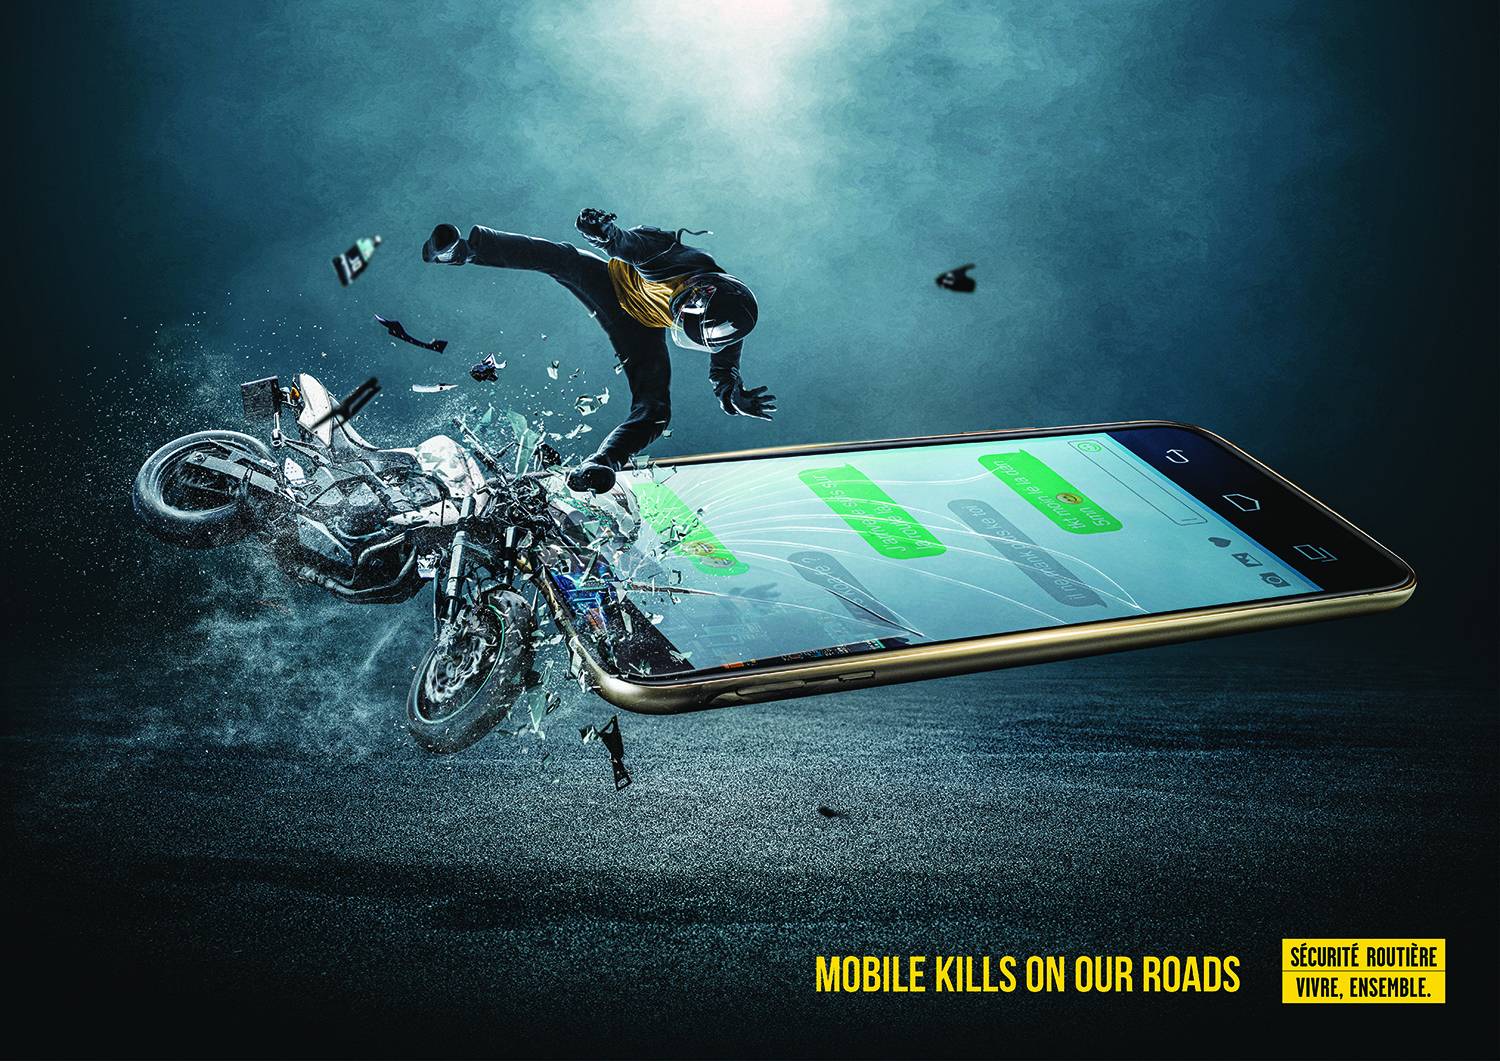 Mobile kills on our roads